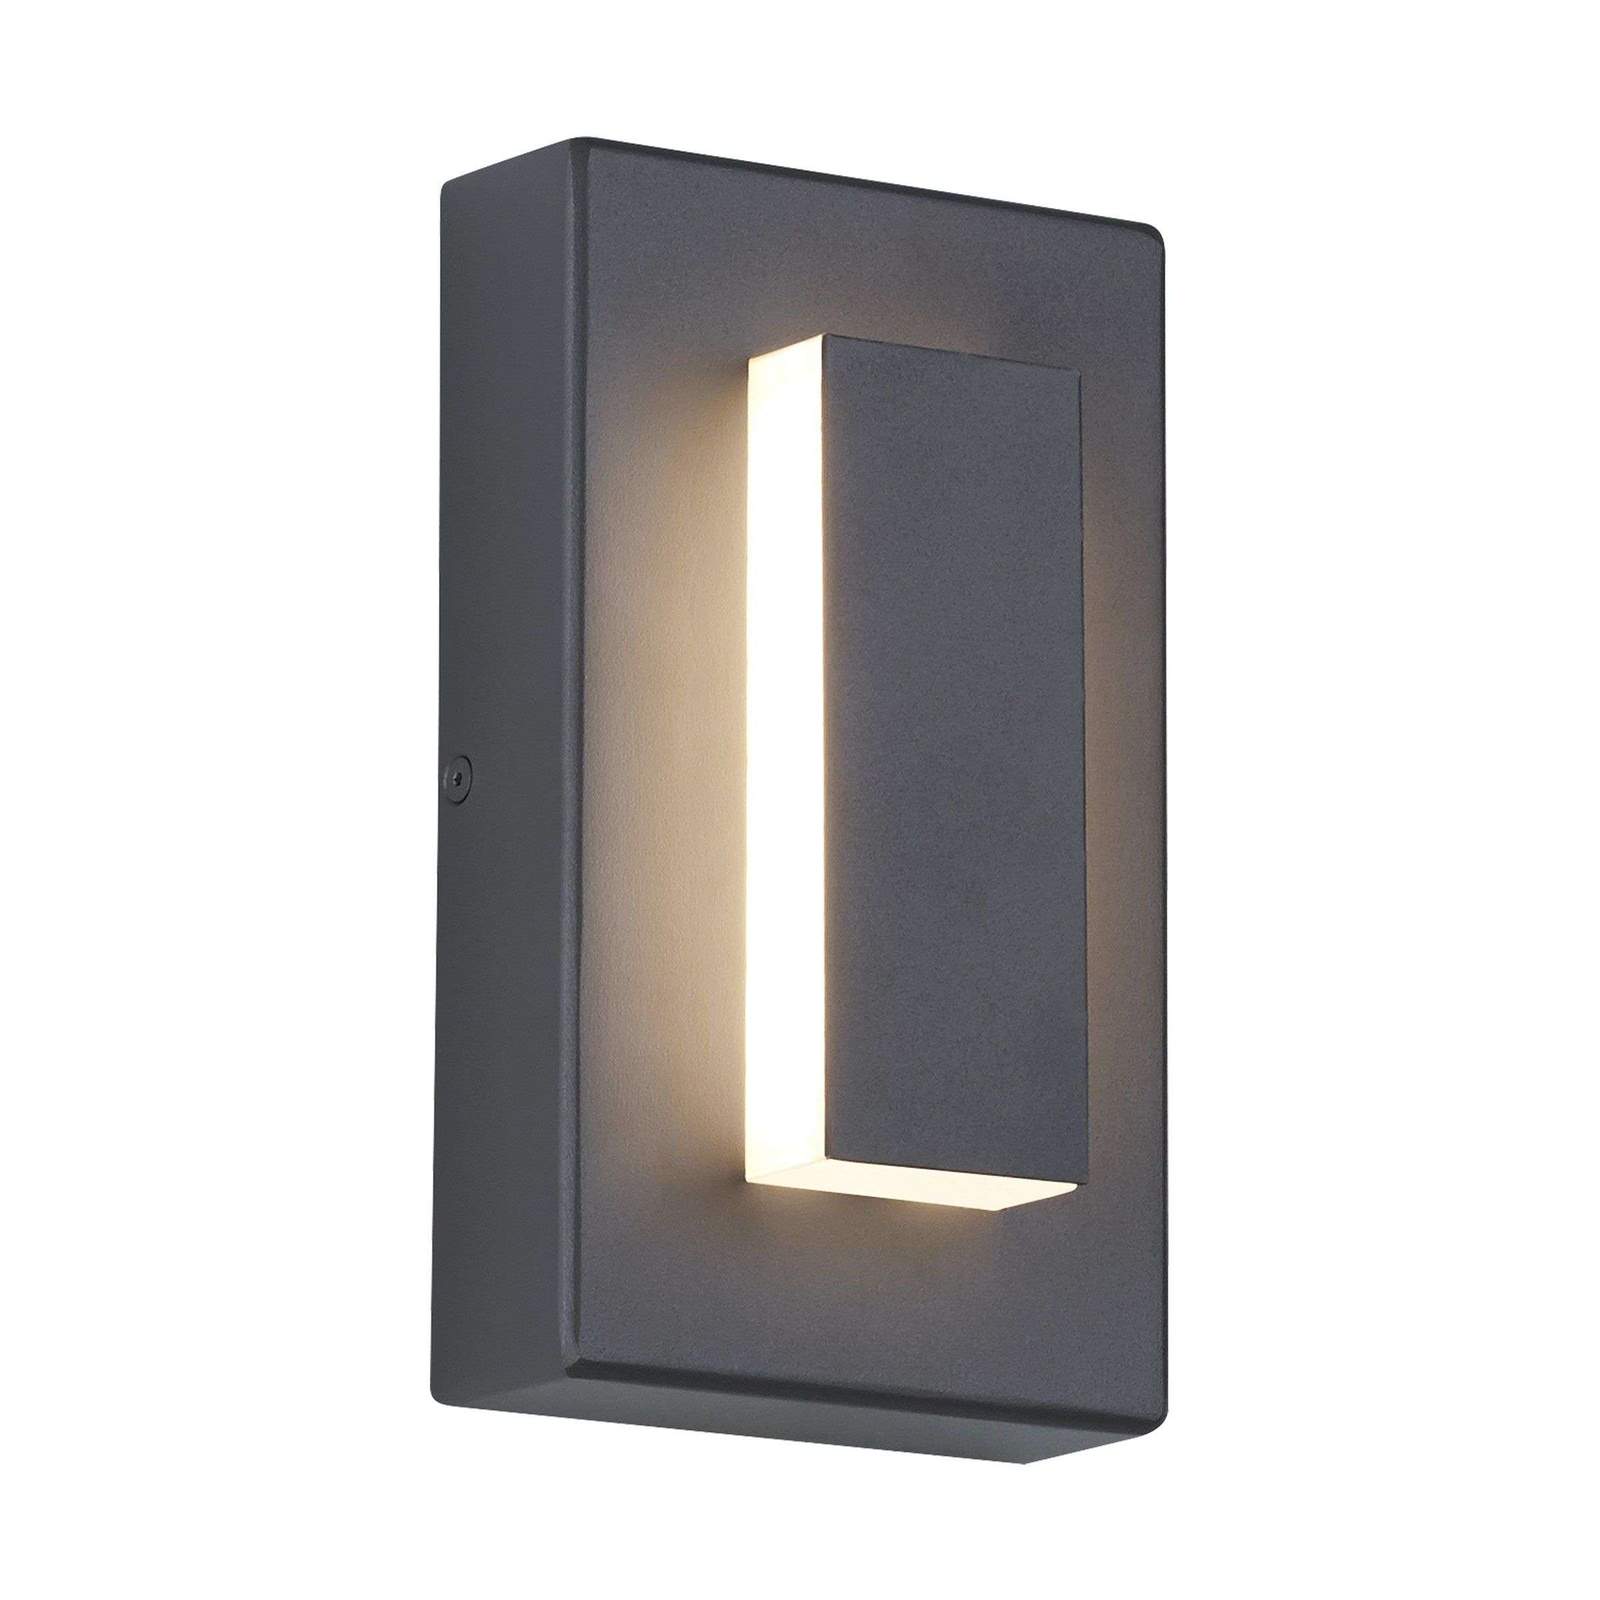 Aspen Outdoor Wall Sconce – Medium / Charcoal / 2700K – Warm White / Surge Protection